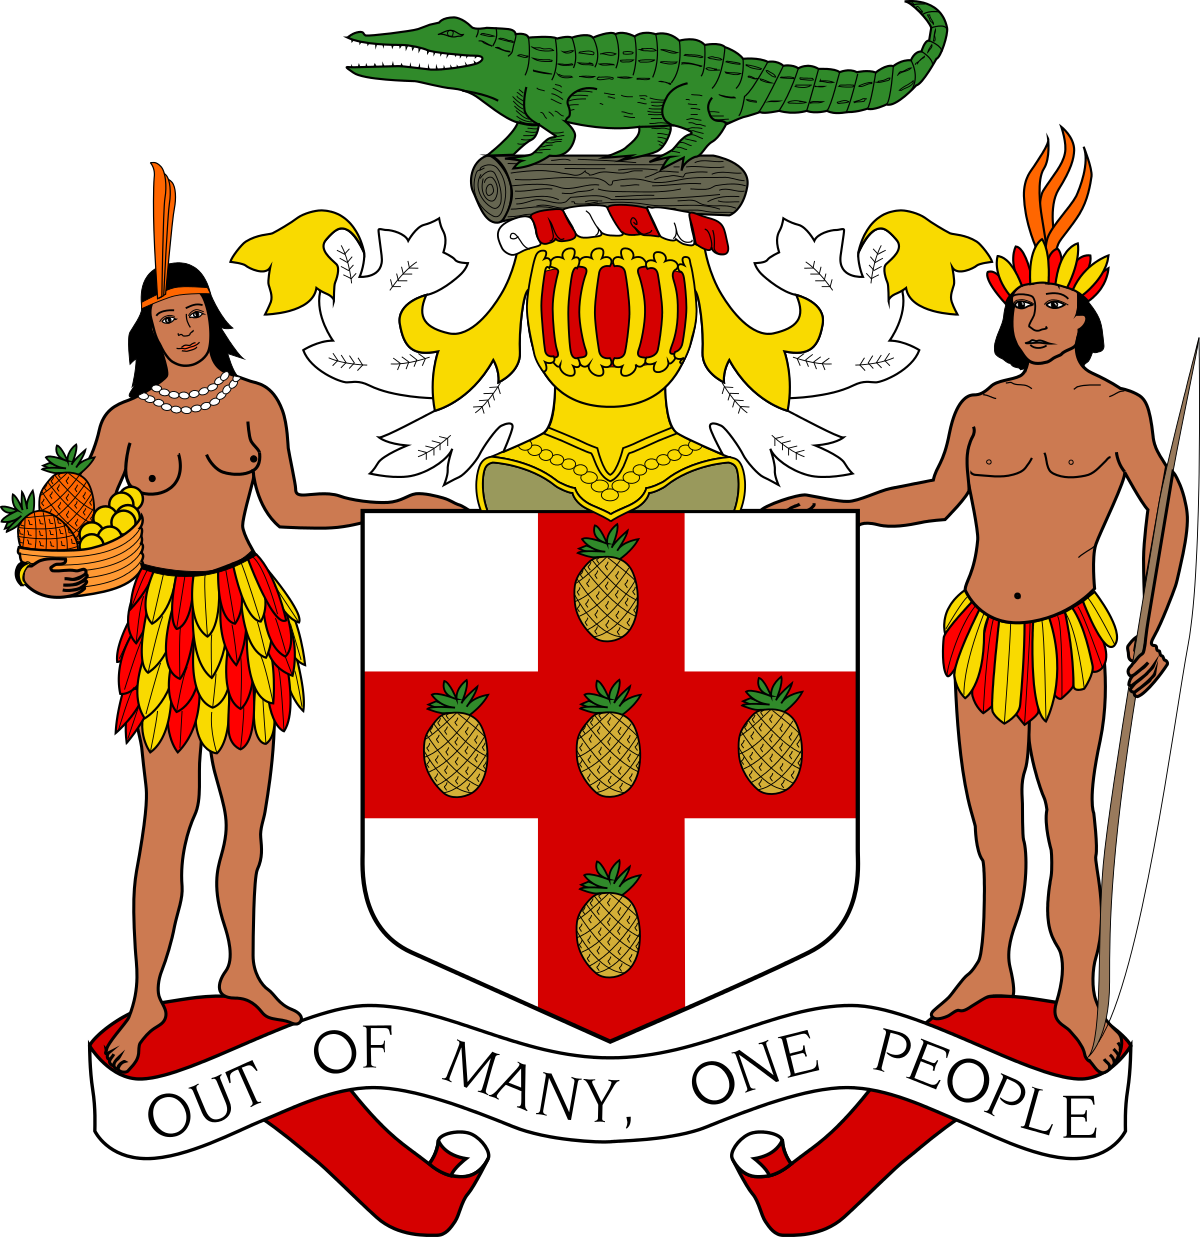 Voting clipart indirect democracy. Monarchy of jamaica wikipedia